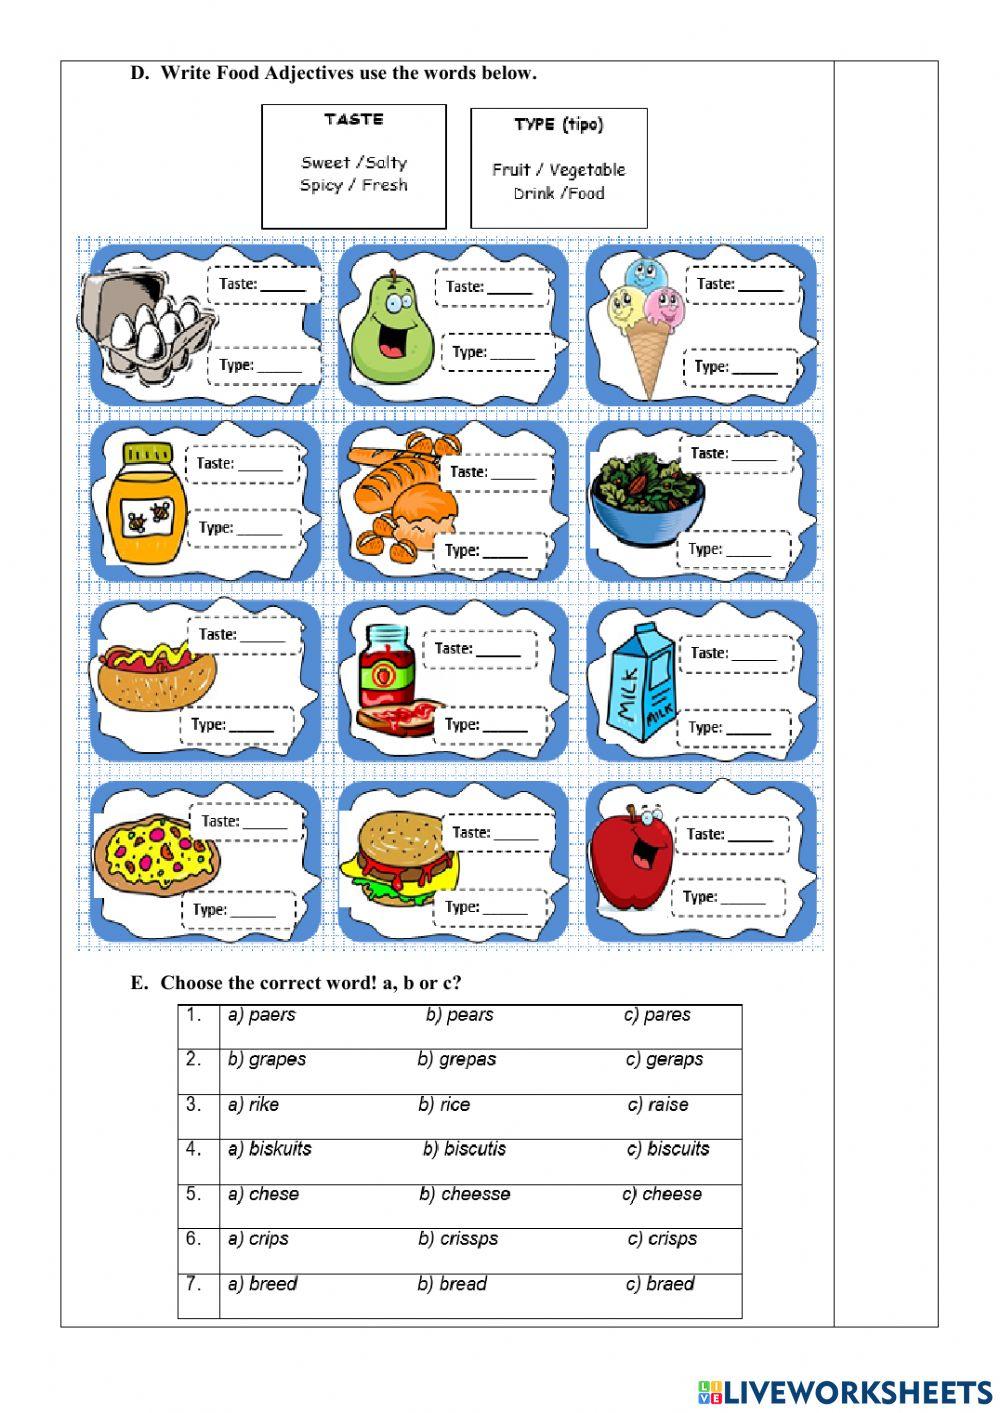 Ejercicios Online-1st BGU A-Countable and Uncountable nouns-Adjectives